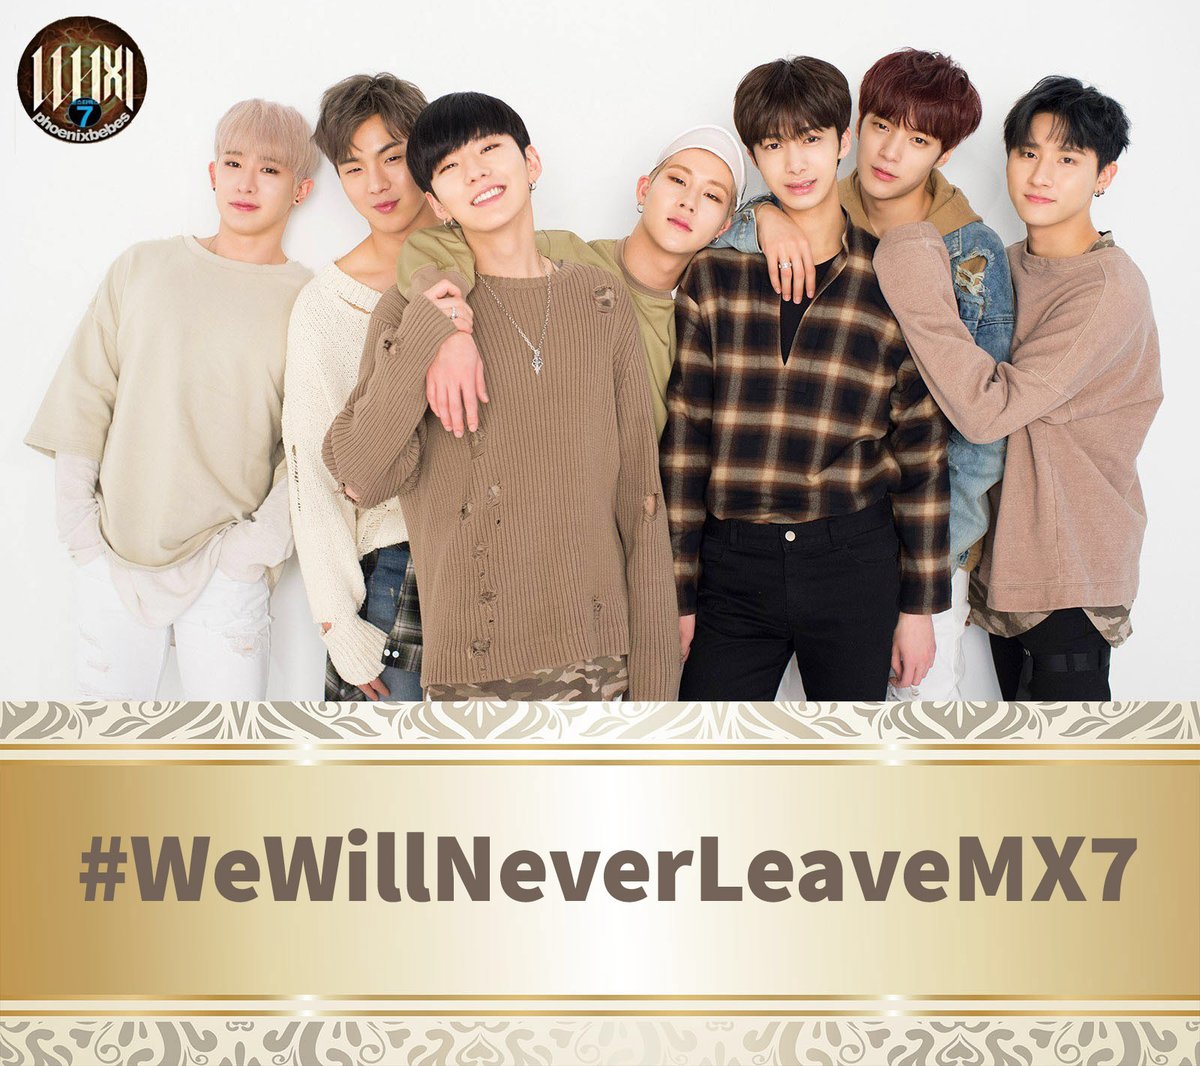 📢 New hashtag are already here We will always be close to MX7. We will never leave them because they are our family ✊ #WeWillNeverLeaveMX7 @OfficialMonstaX @official__wonho